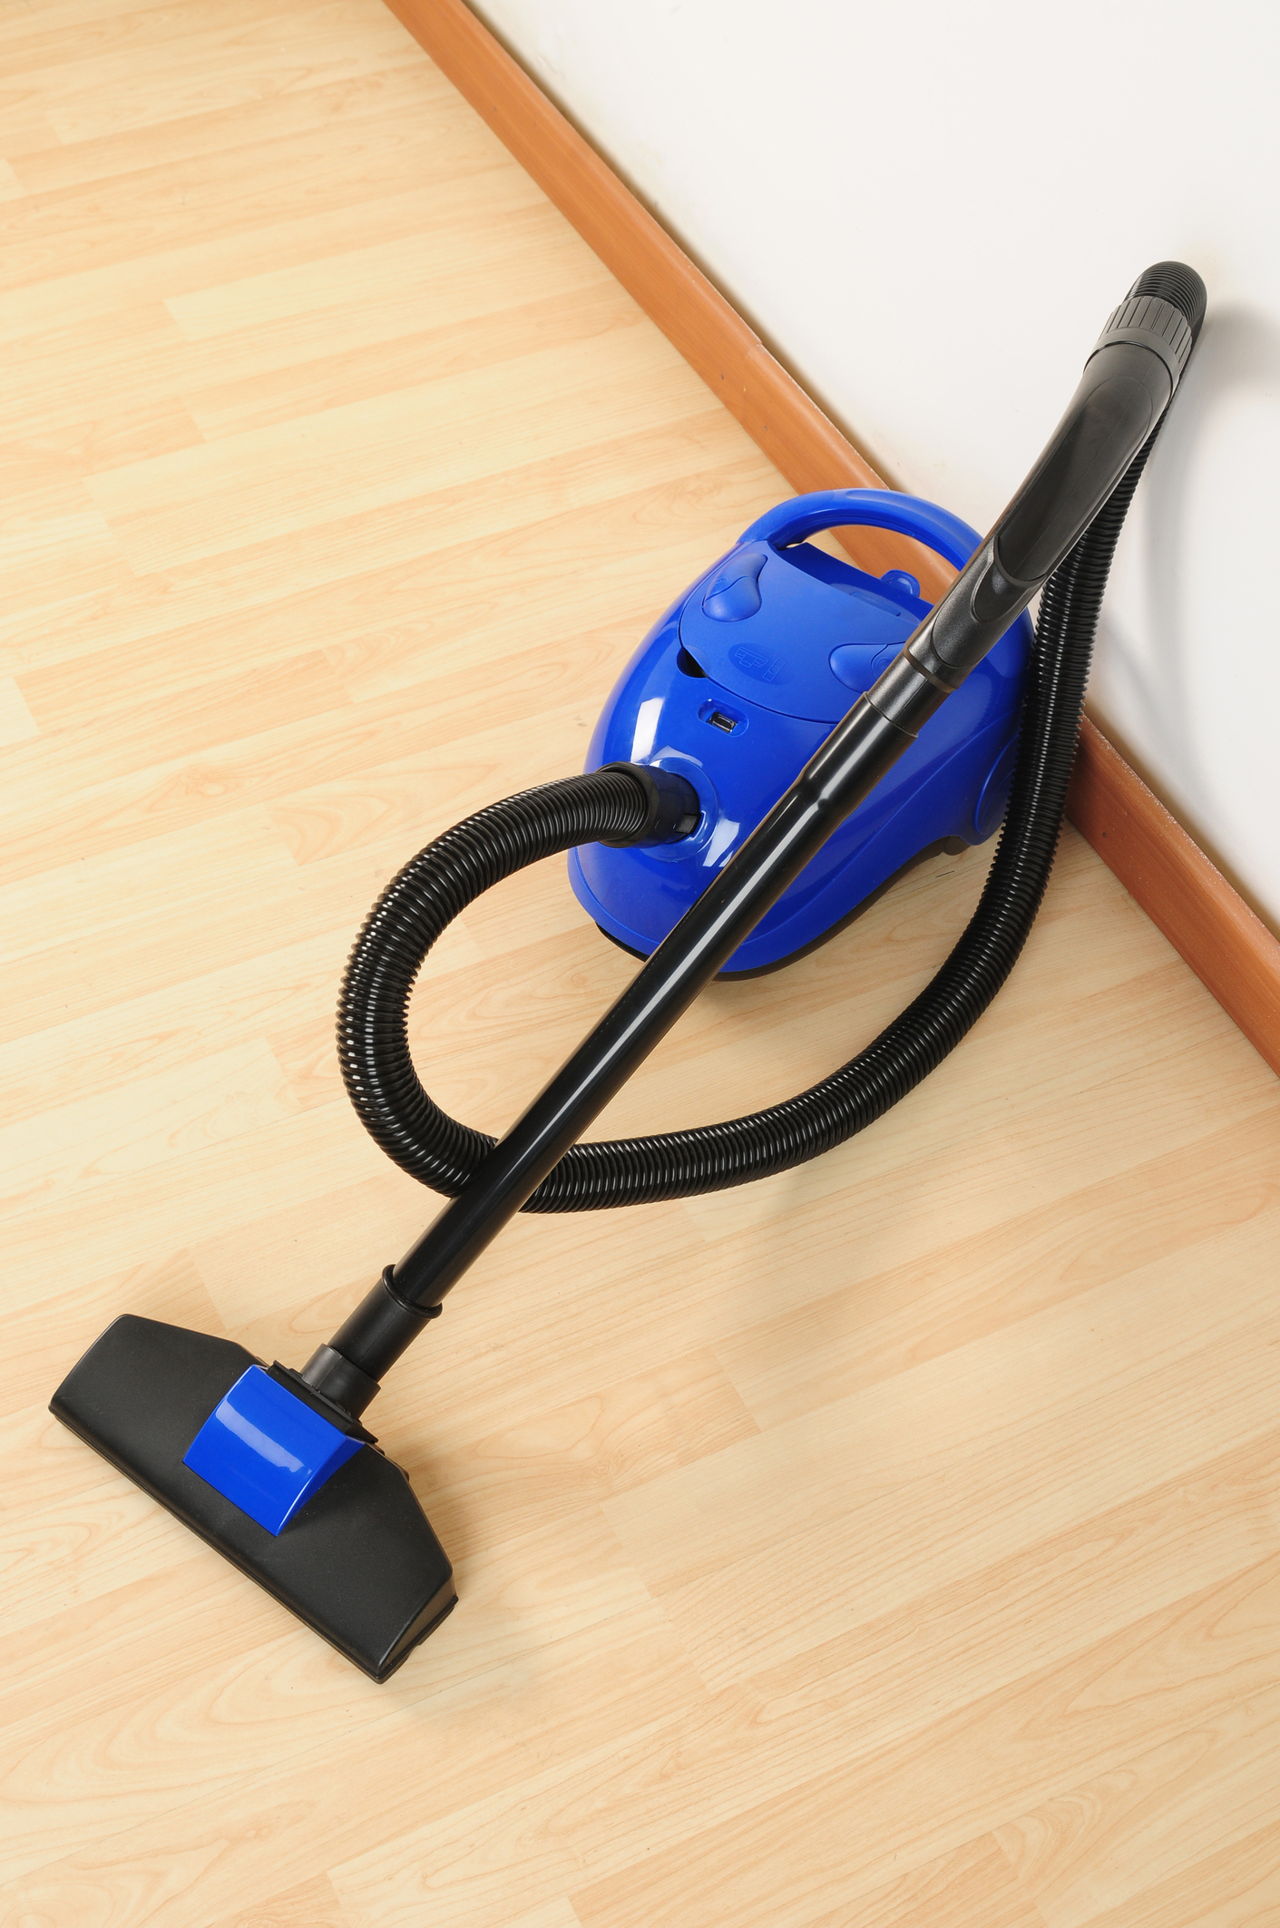 Clean Laminate Floors Without Streaking, How To Get Streak Free Laminate Floors